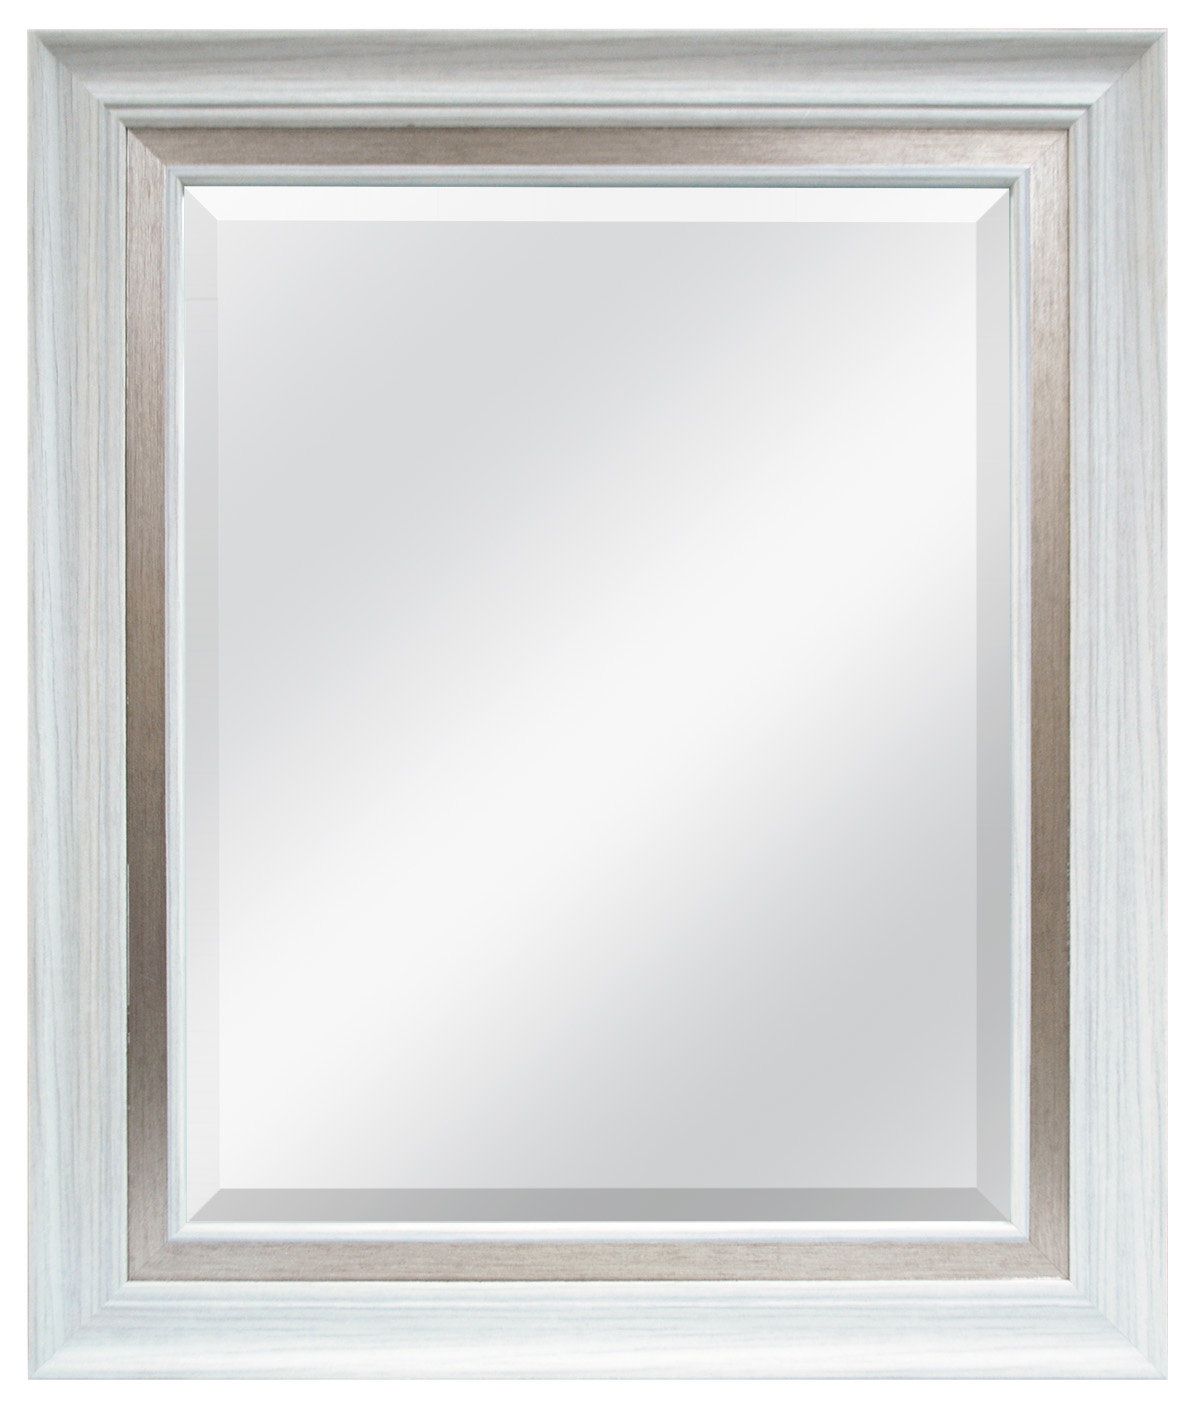 Aubagne White Brushed Steel Beveled Wall Mirror With Burgoyne Vanity Mirrors (View 20 of 20)